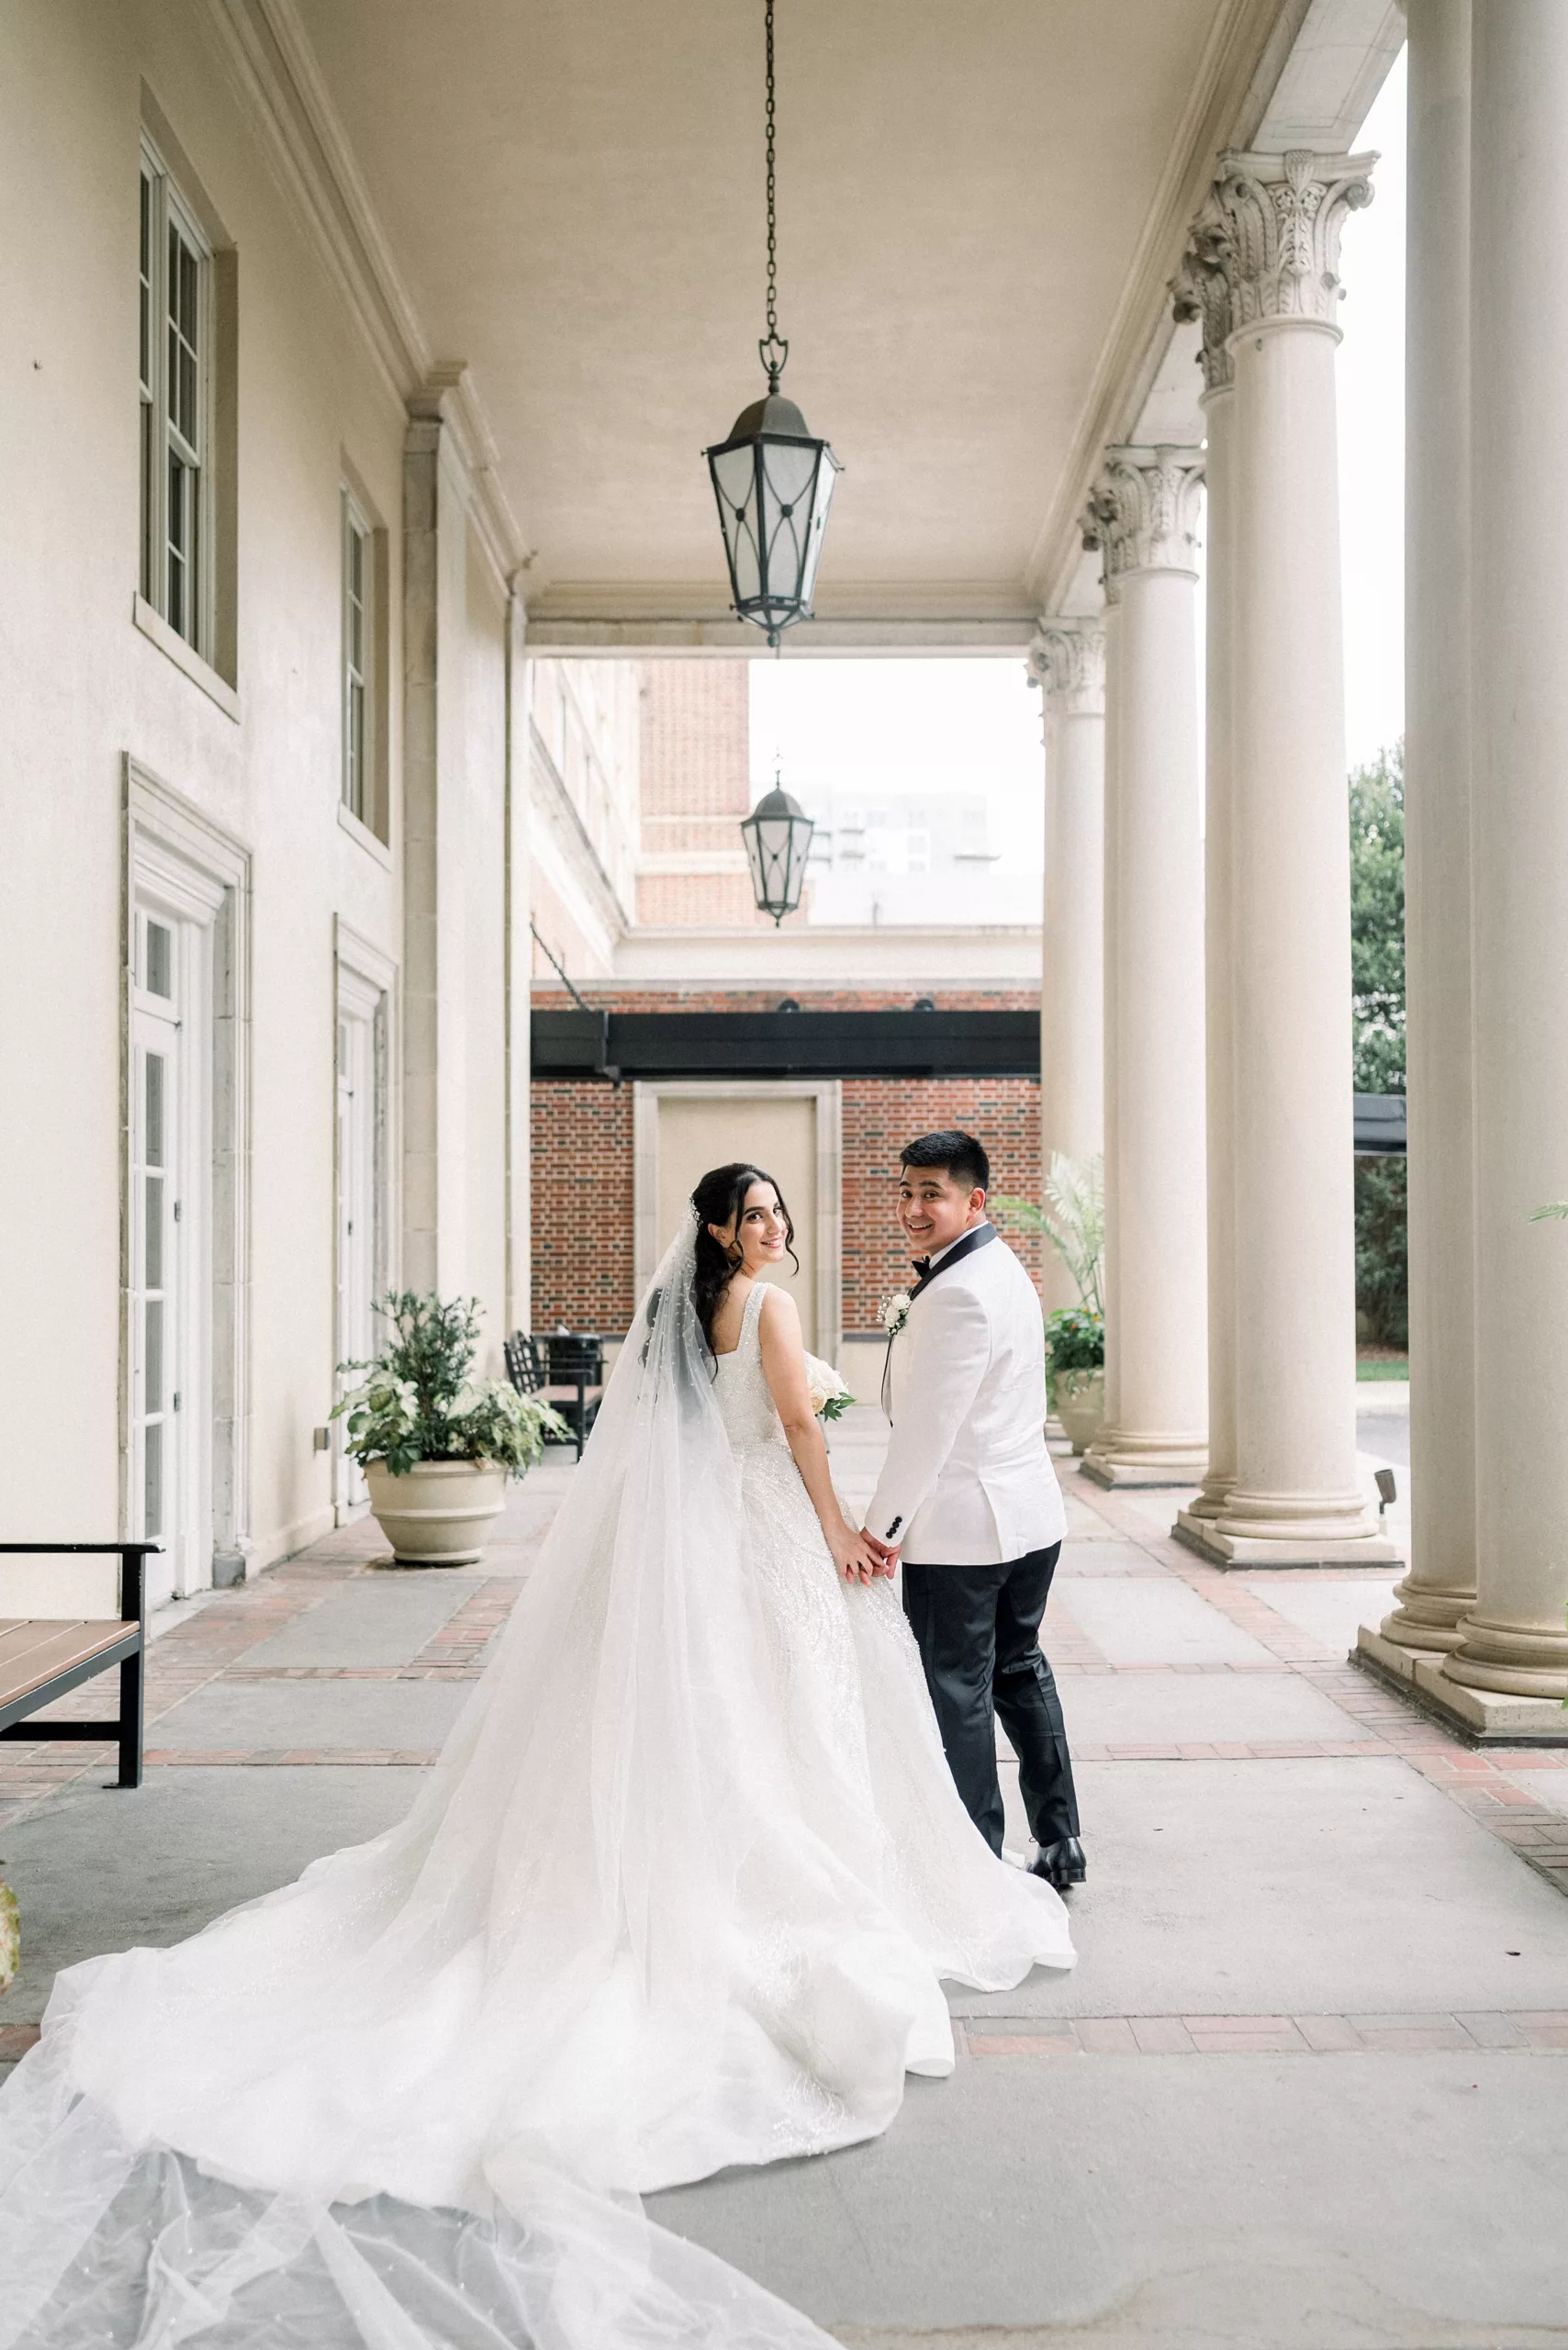 Newlyweds look over their shoulder while holding hands walking on the columned porch of the Biltmore Ballrooms Wedding venue